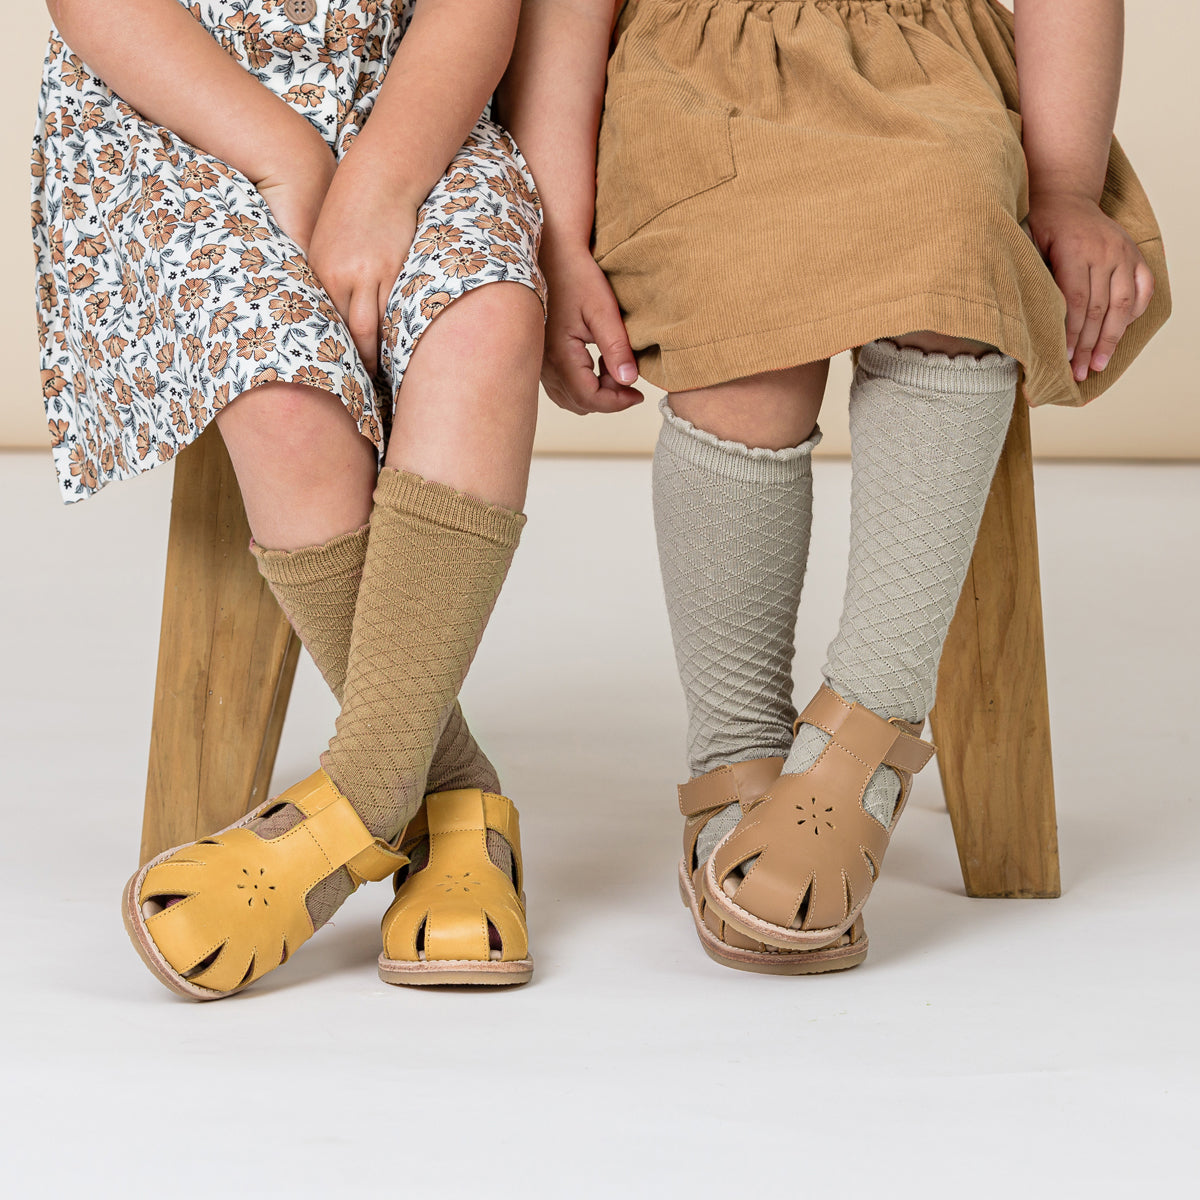 Toddlers wearing TBar sandals. 